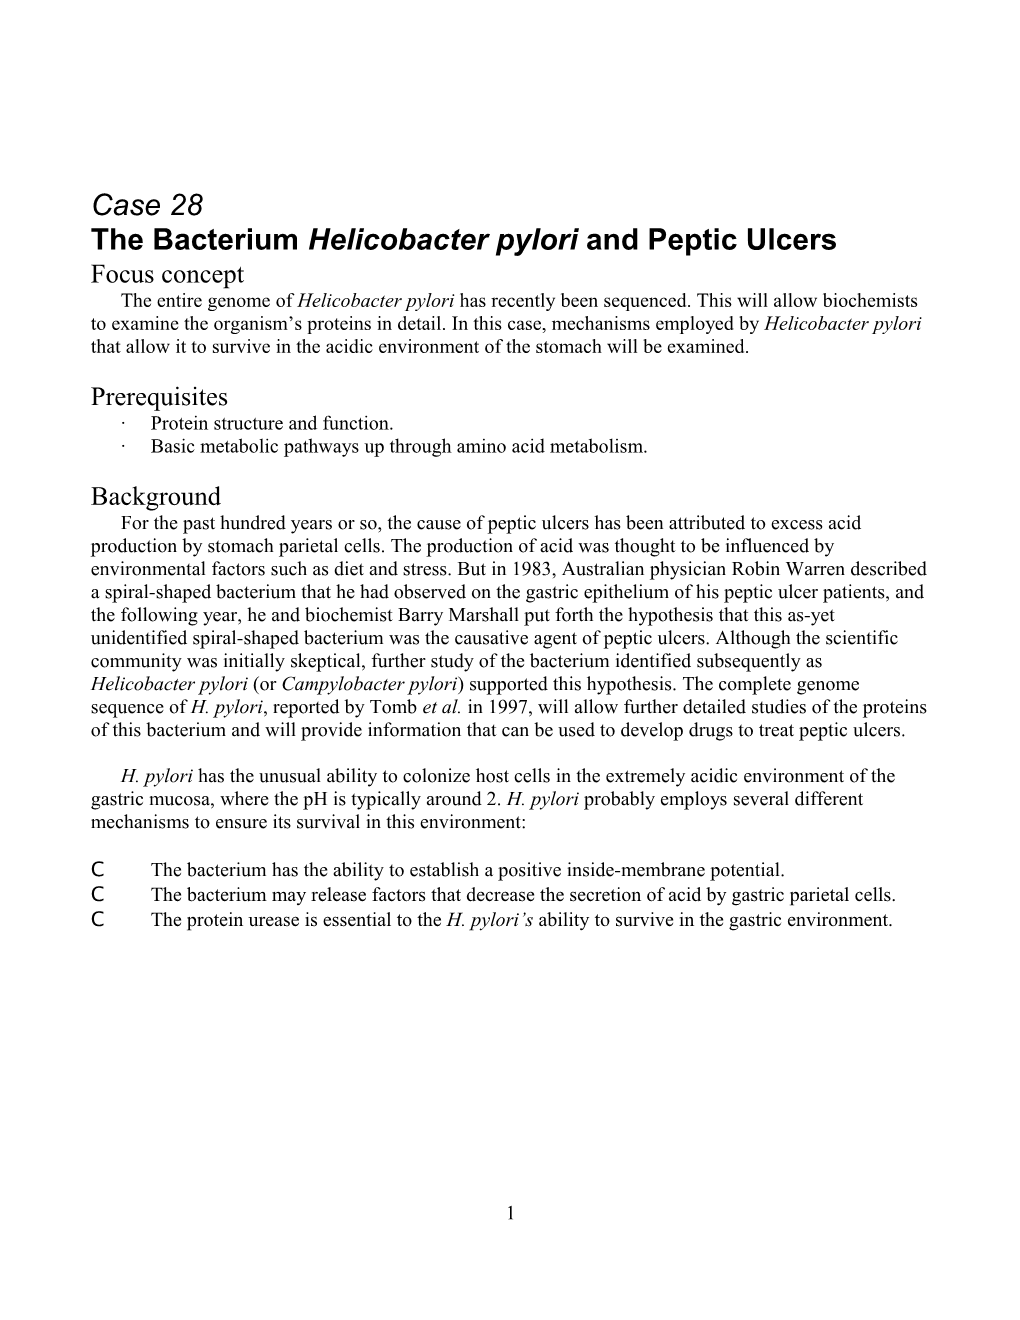 The Bacterium Helicobacter Pylori and Peptic Ulcers